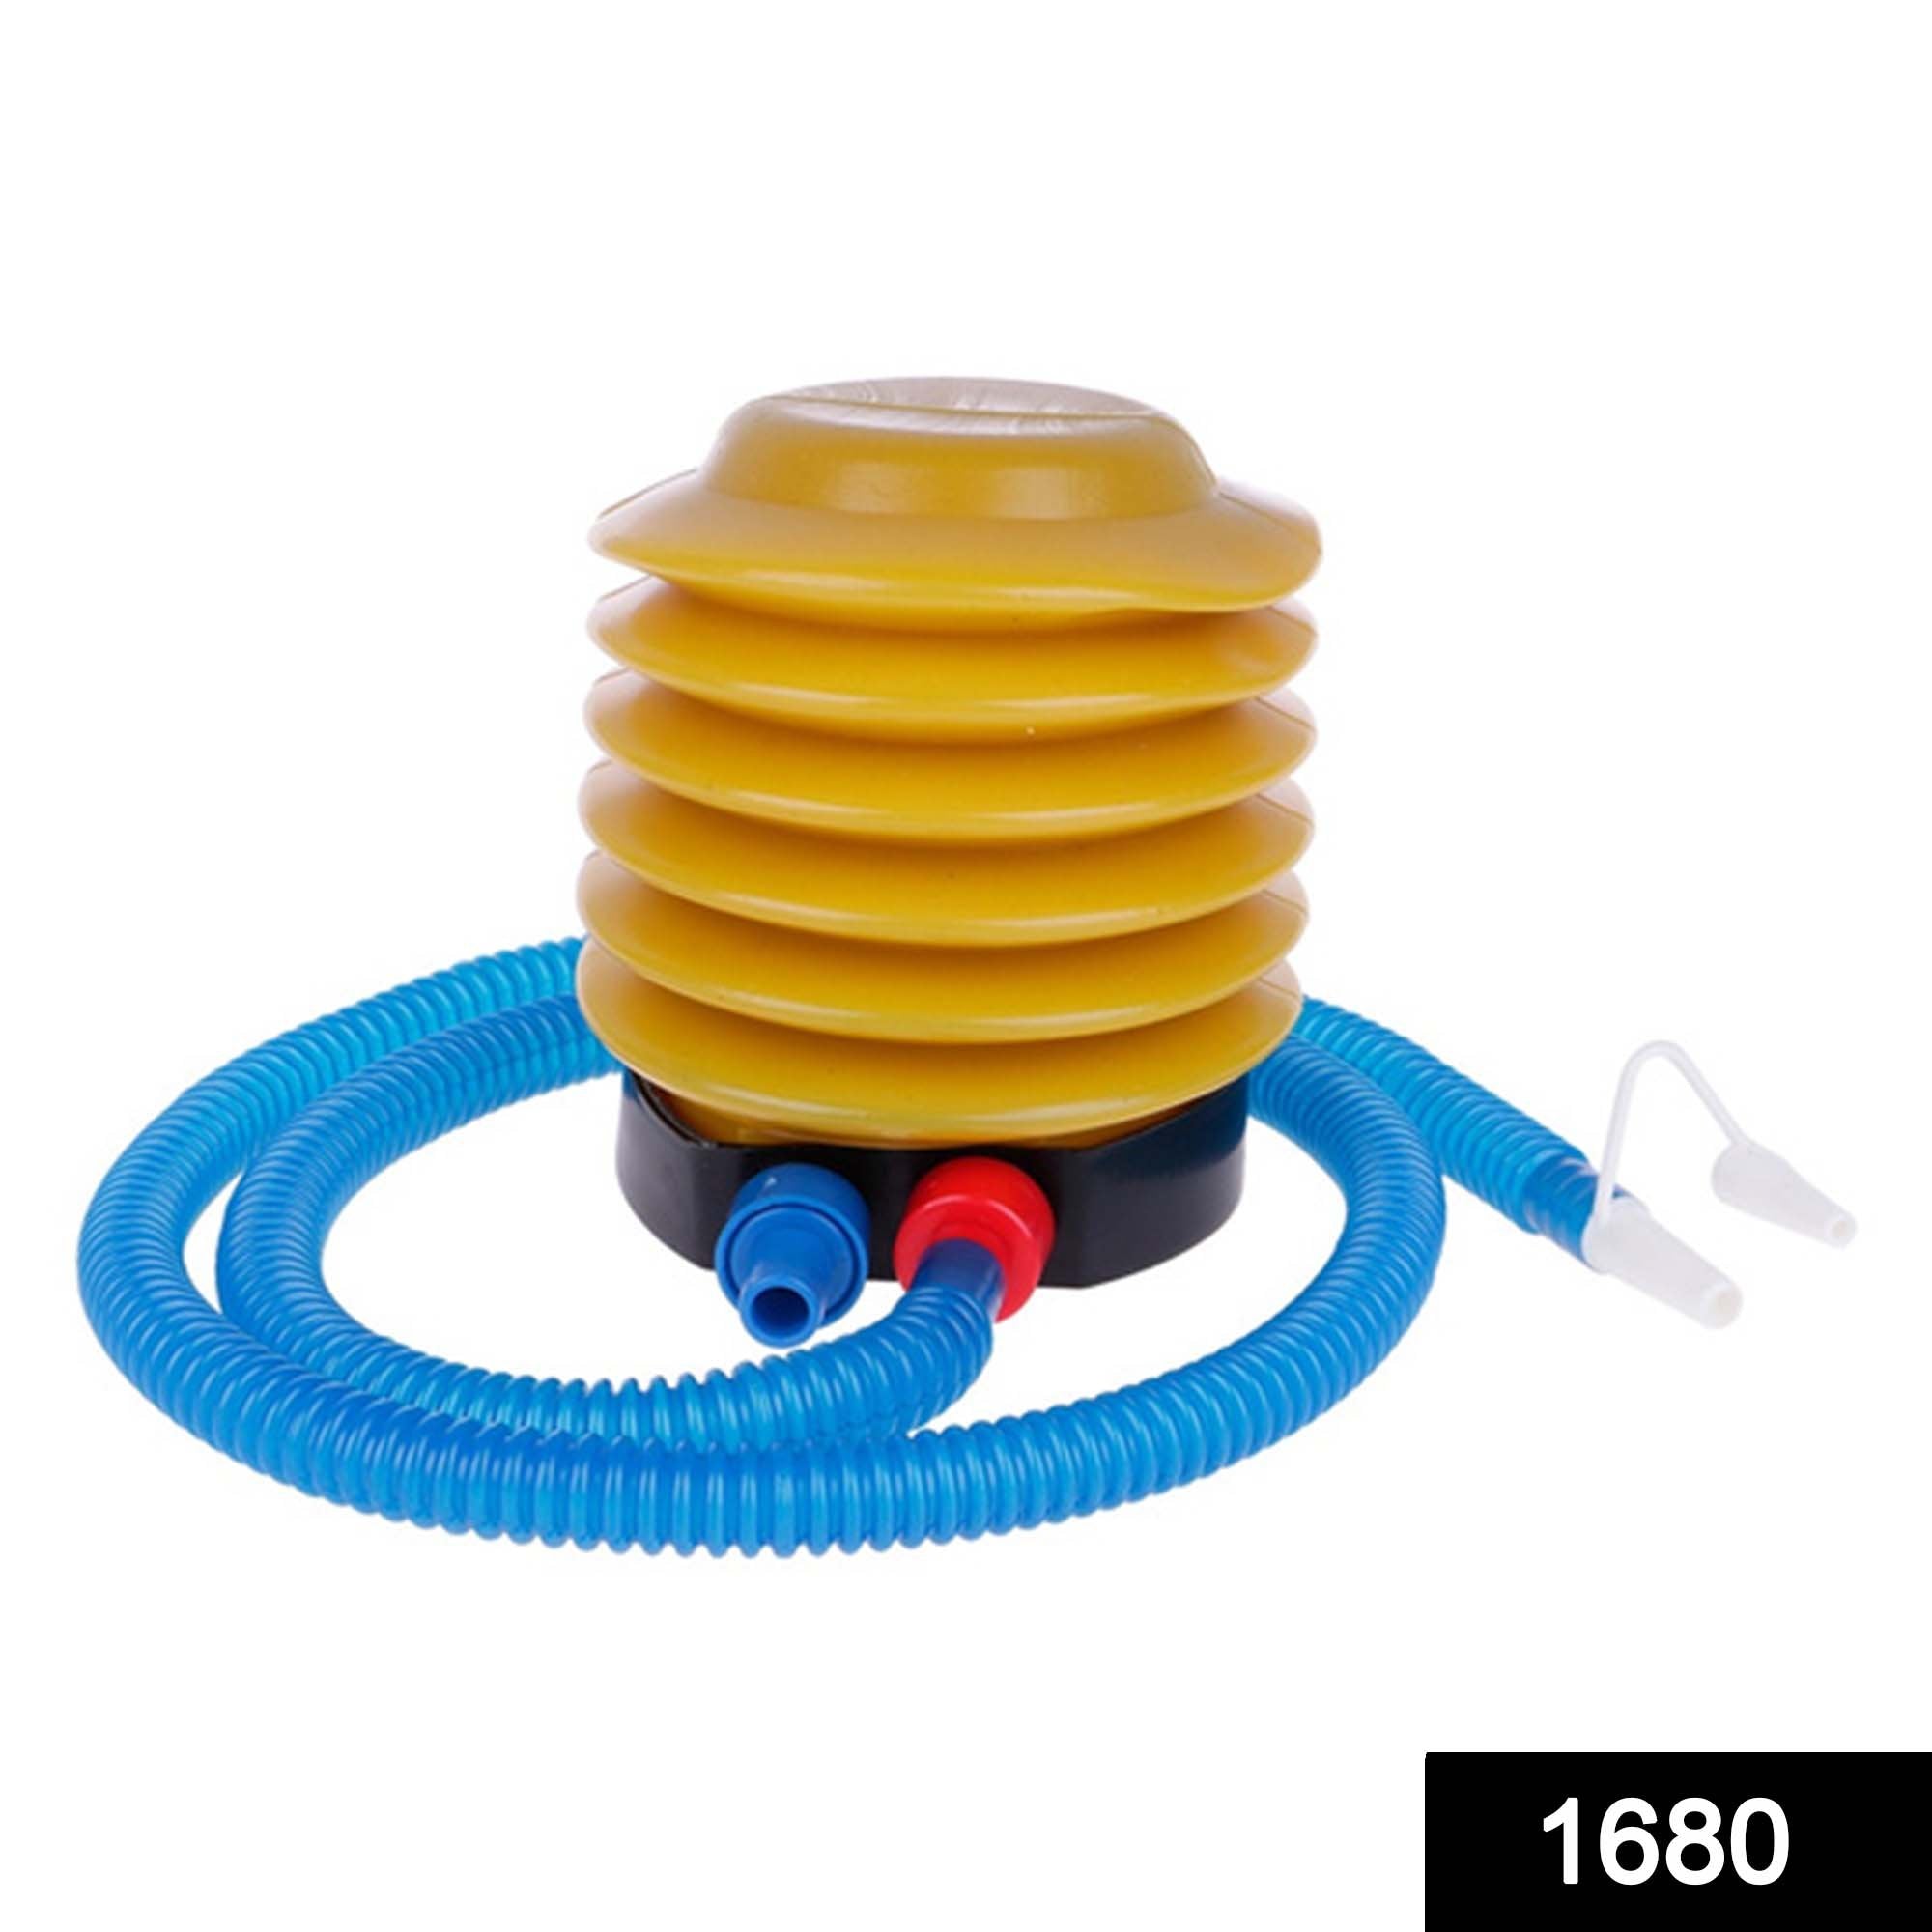 1680 Portable Foot Air Pump with Hose - SkyShopy